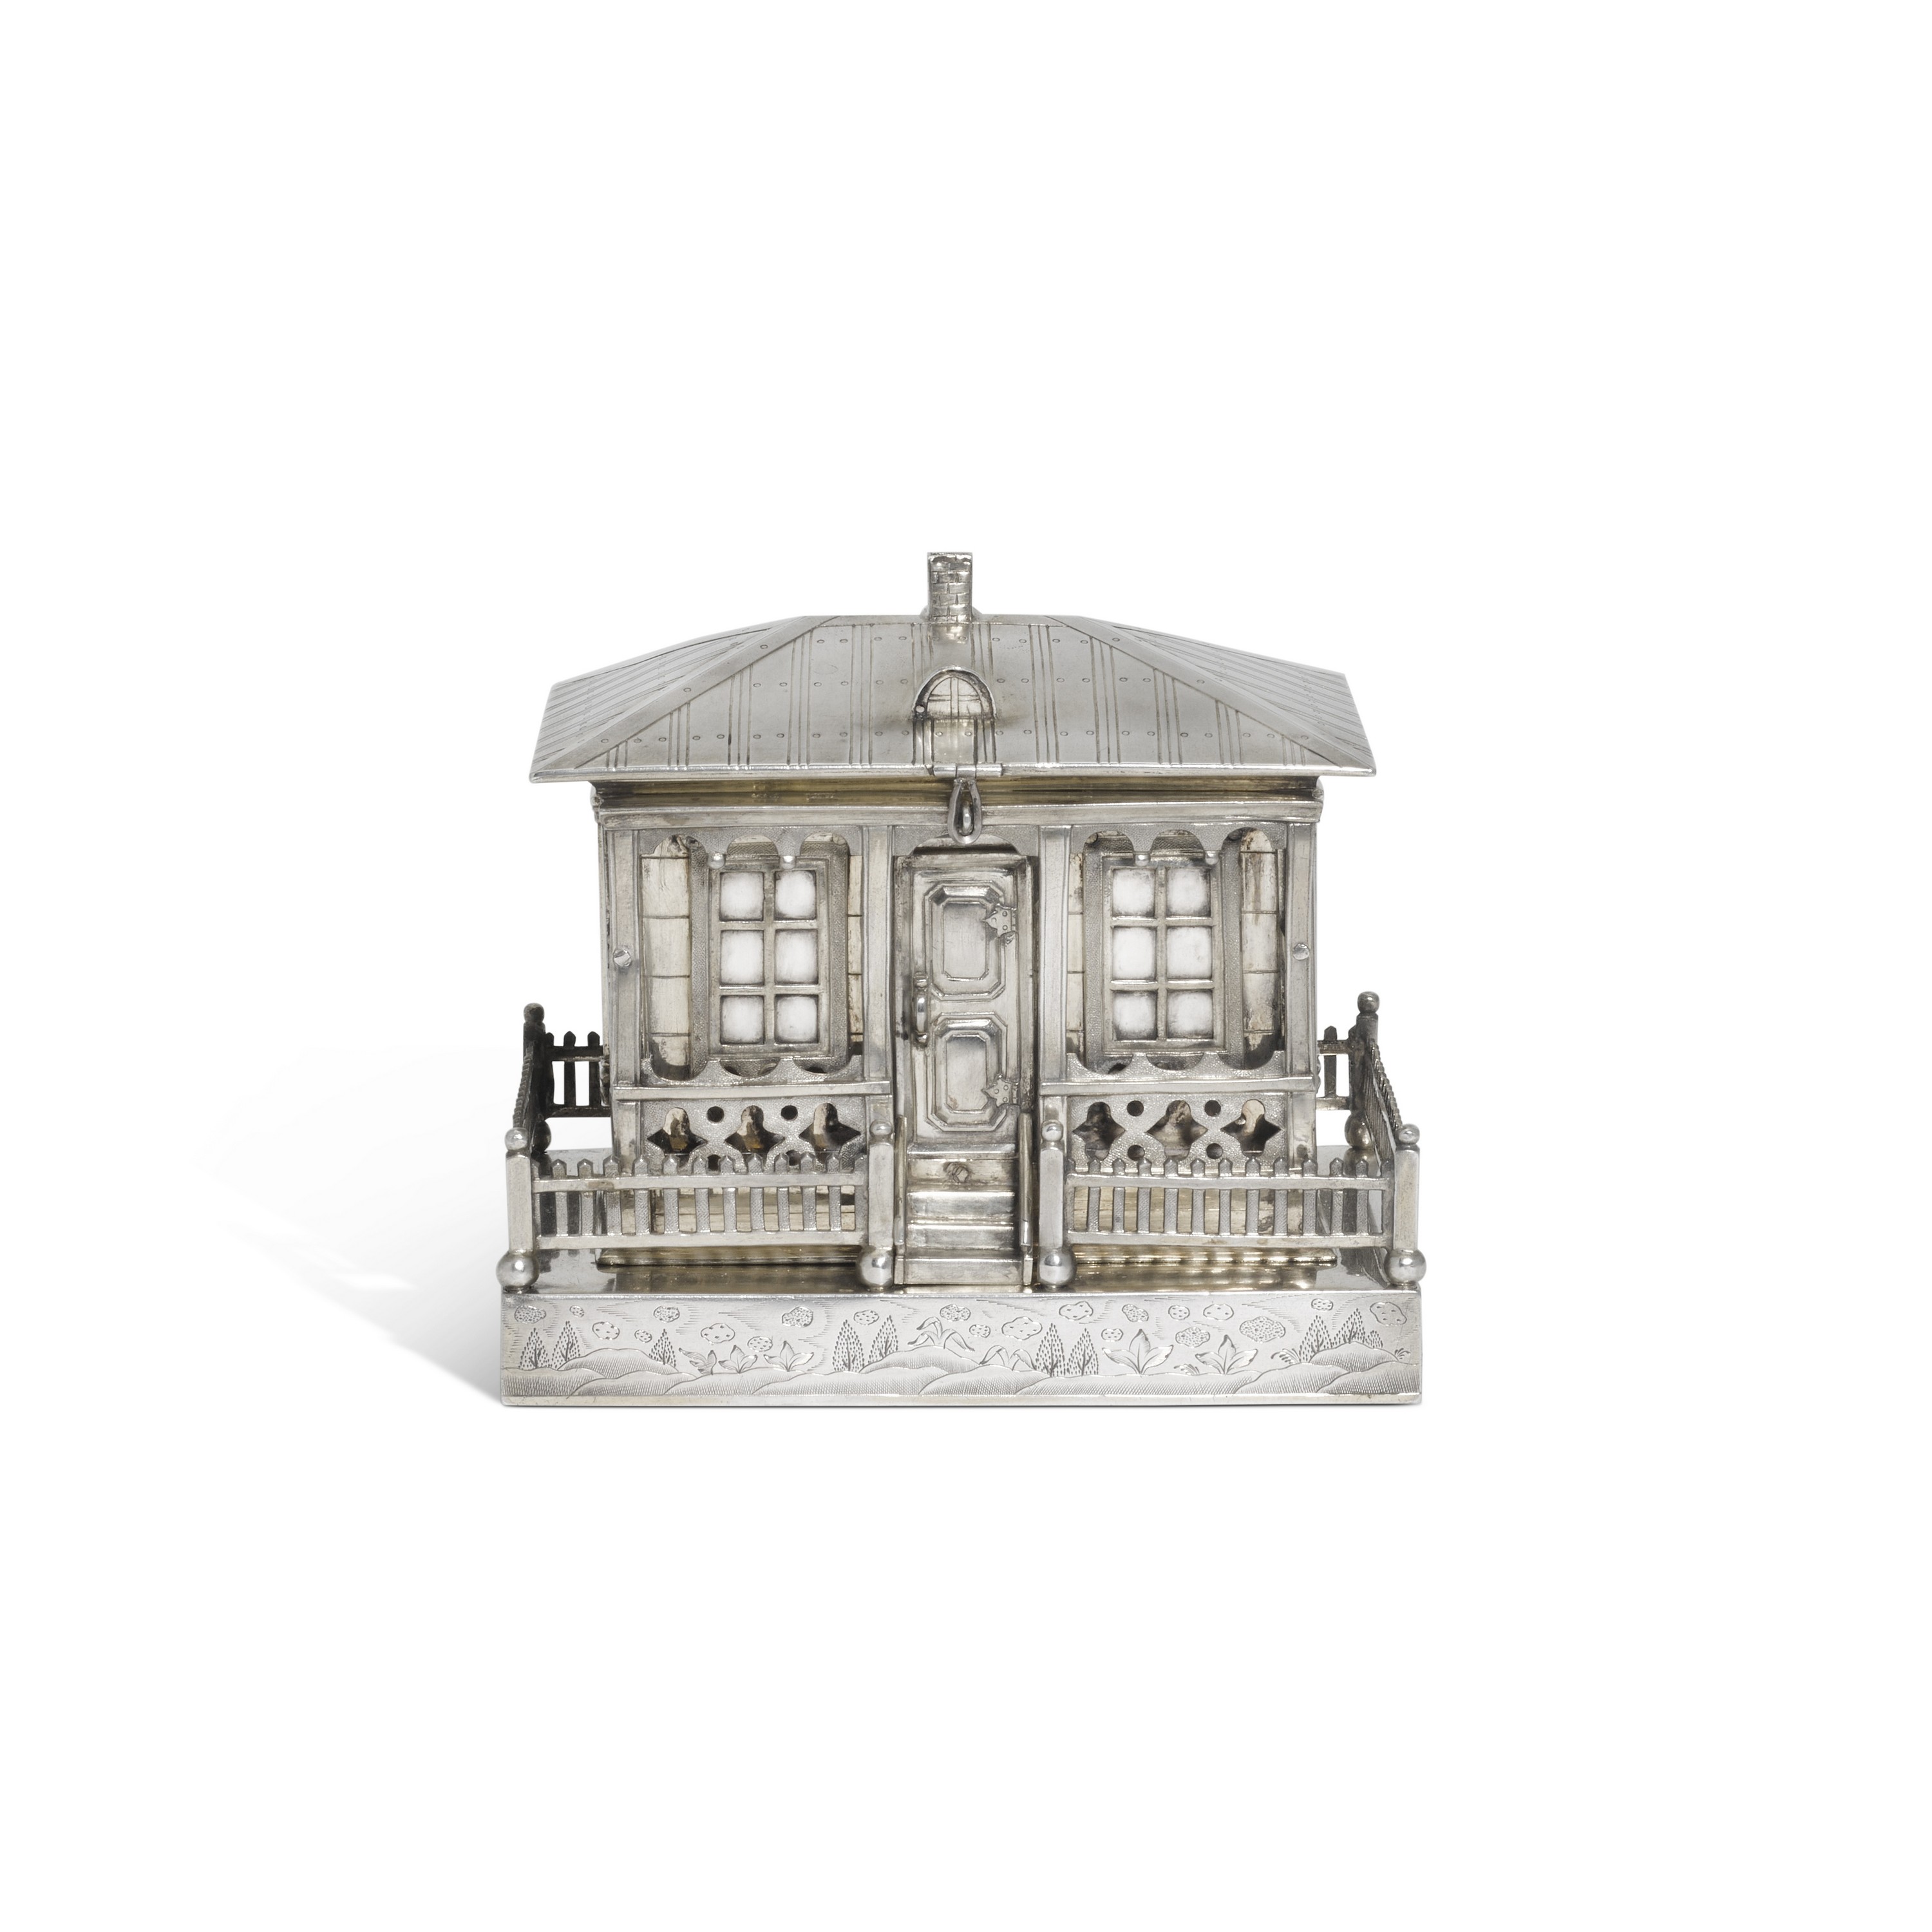 A silver trompe l'oeil box modelled as a house, Andrei Wekman, Moscow, 1869 - Image 3 of 5